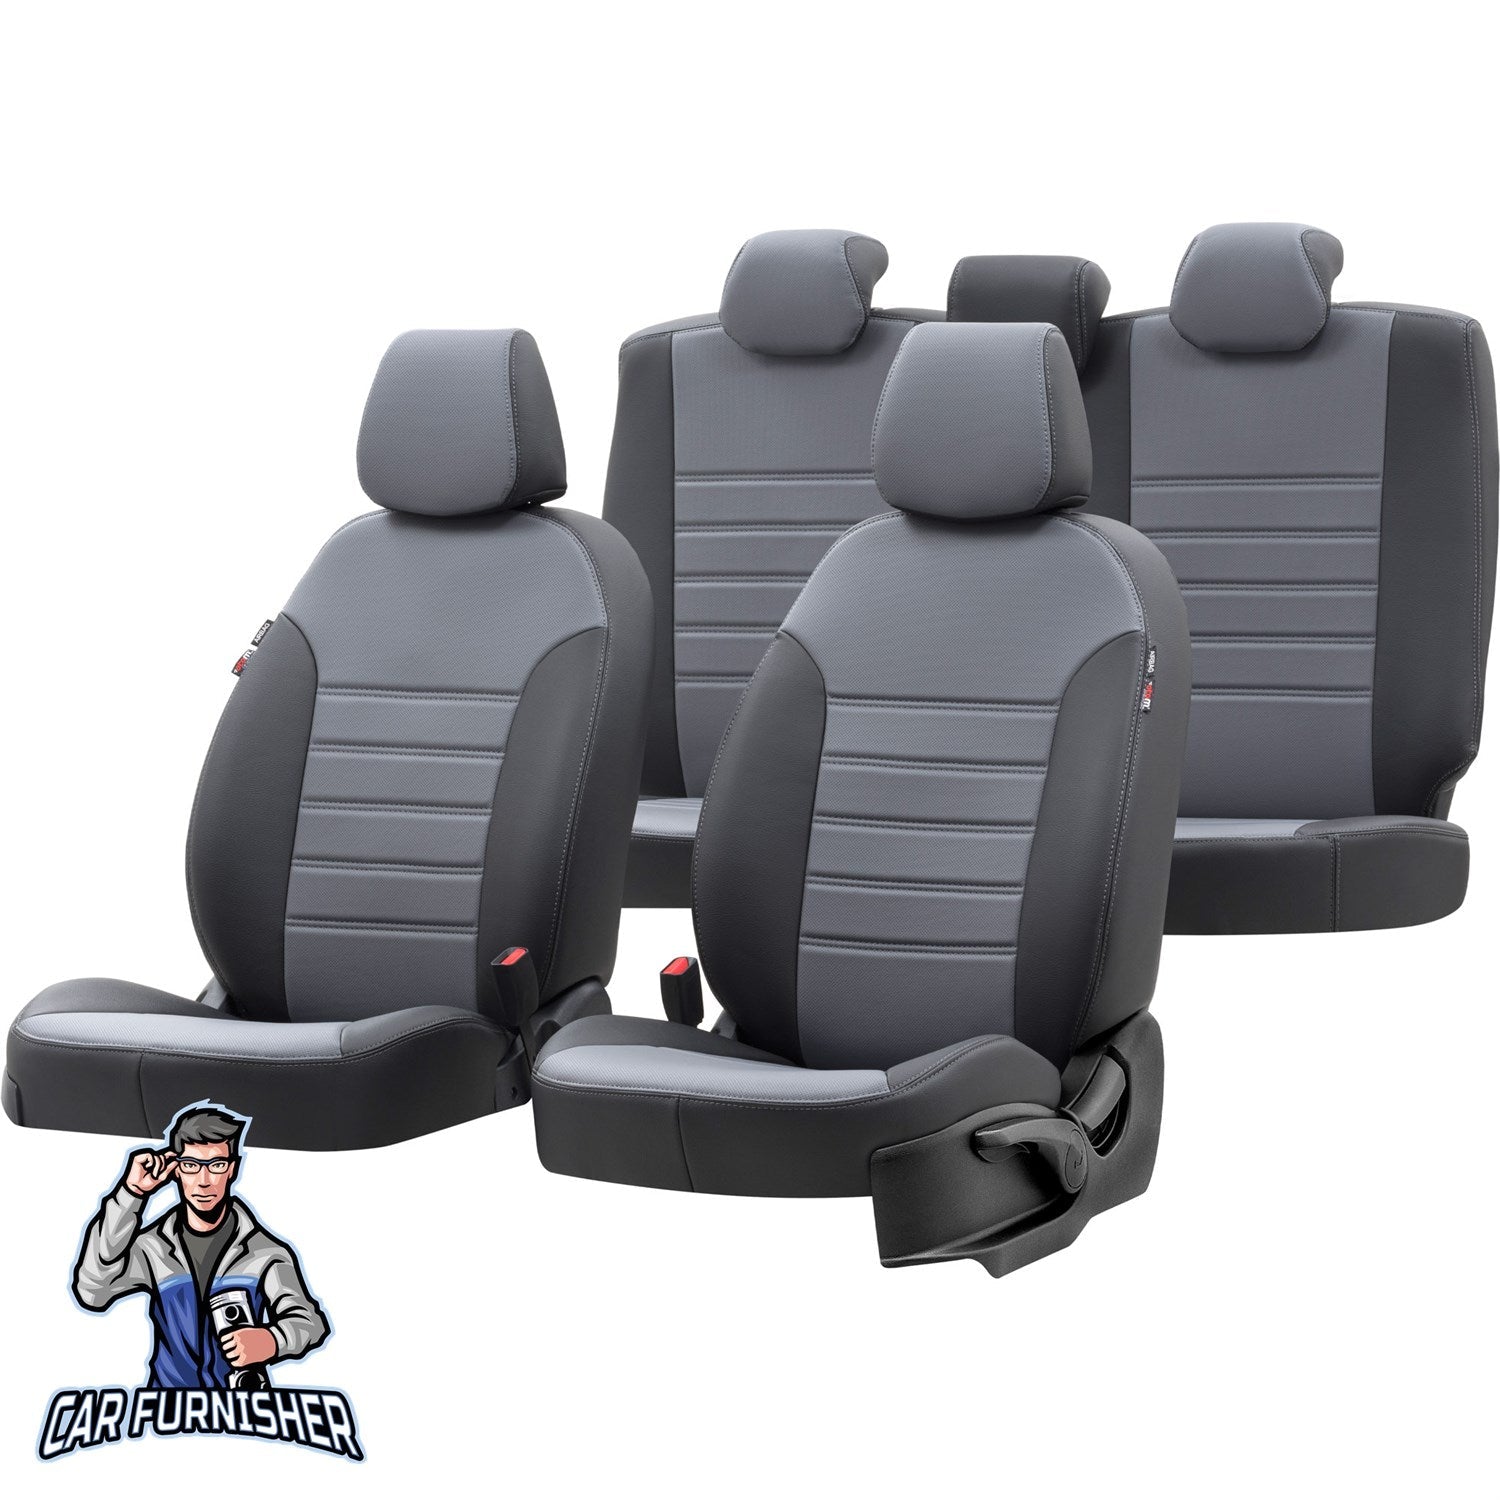 Toyota Auris Seat Cover Istanbul Leather Design Smoked Black Leather